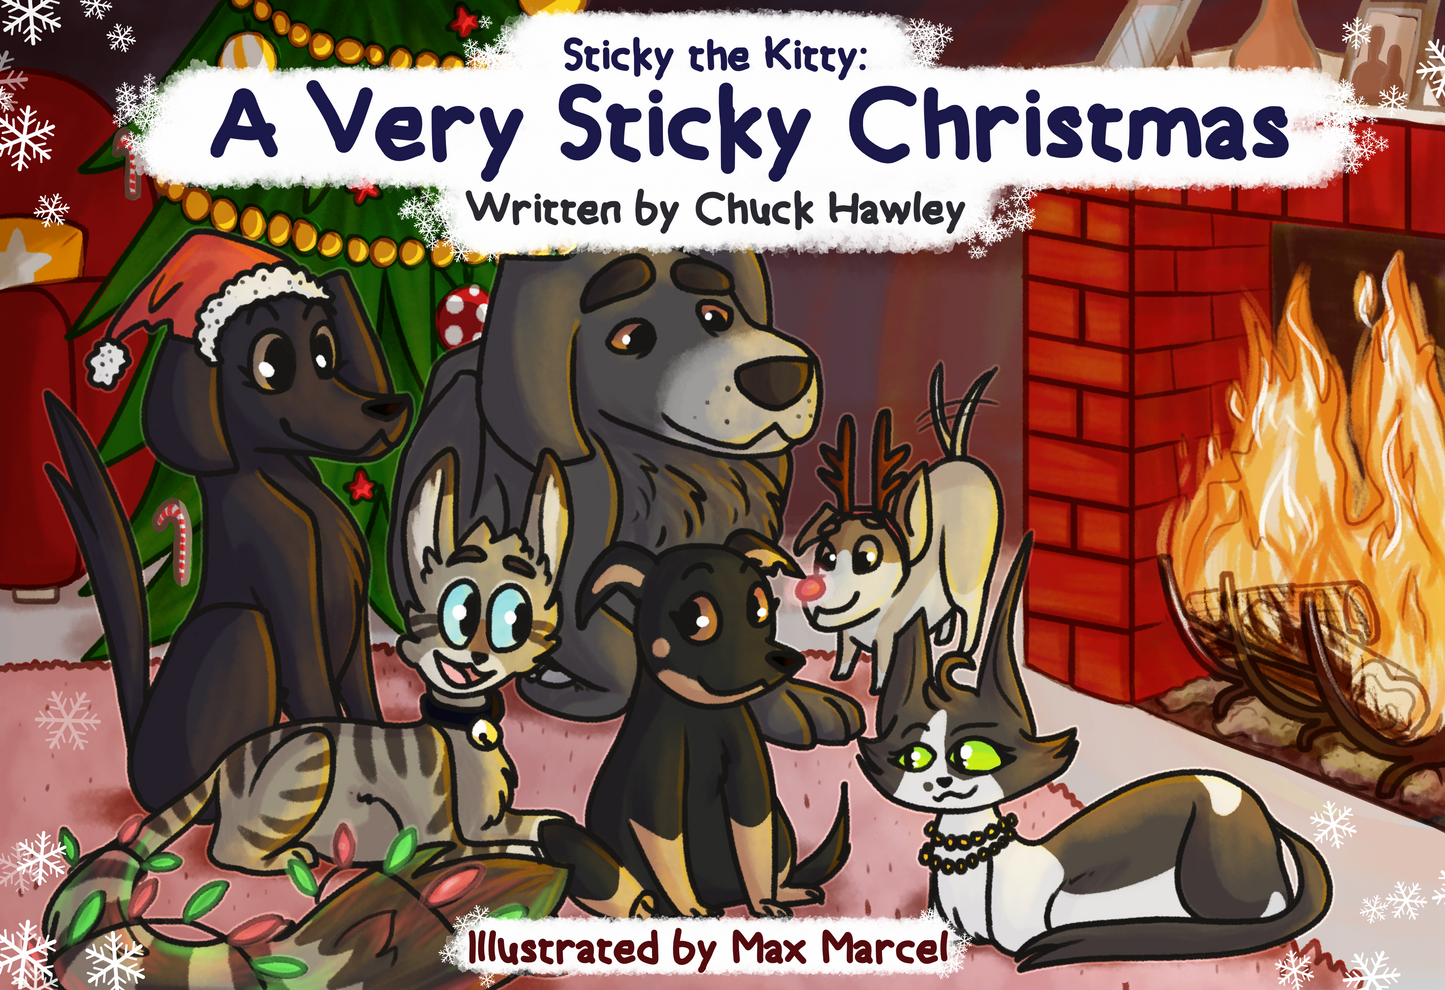 Sticky The Kitty; Volume 4 - A Very Sticky Christmas! Did Sticky mention, he LOVES Christmas? The PERFECT Christmas Eve story to get the kids ready for Santa's visit!